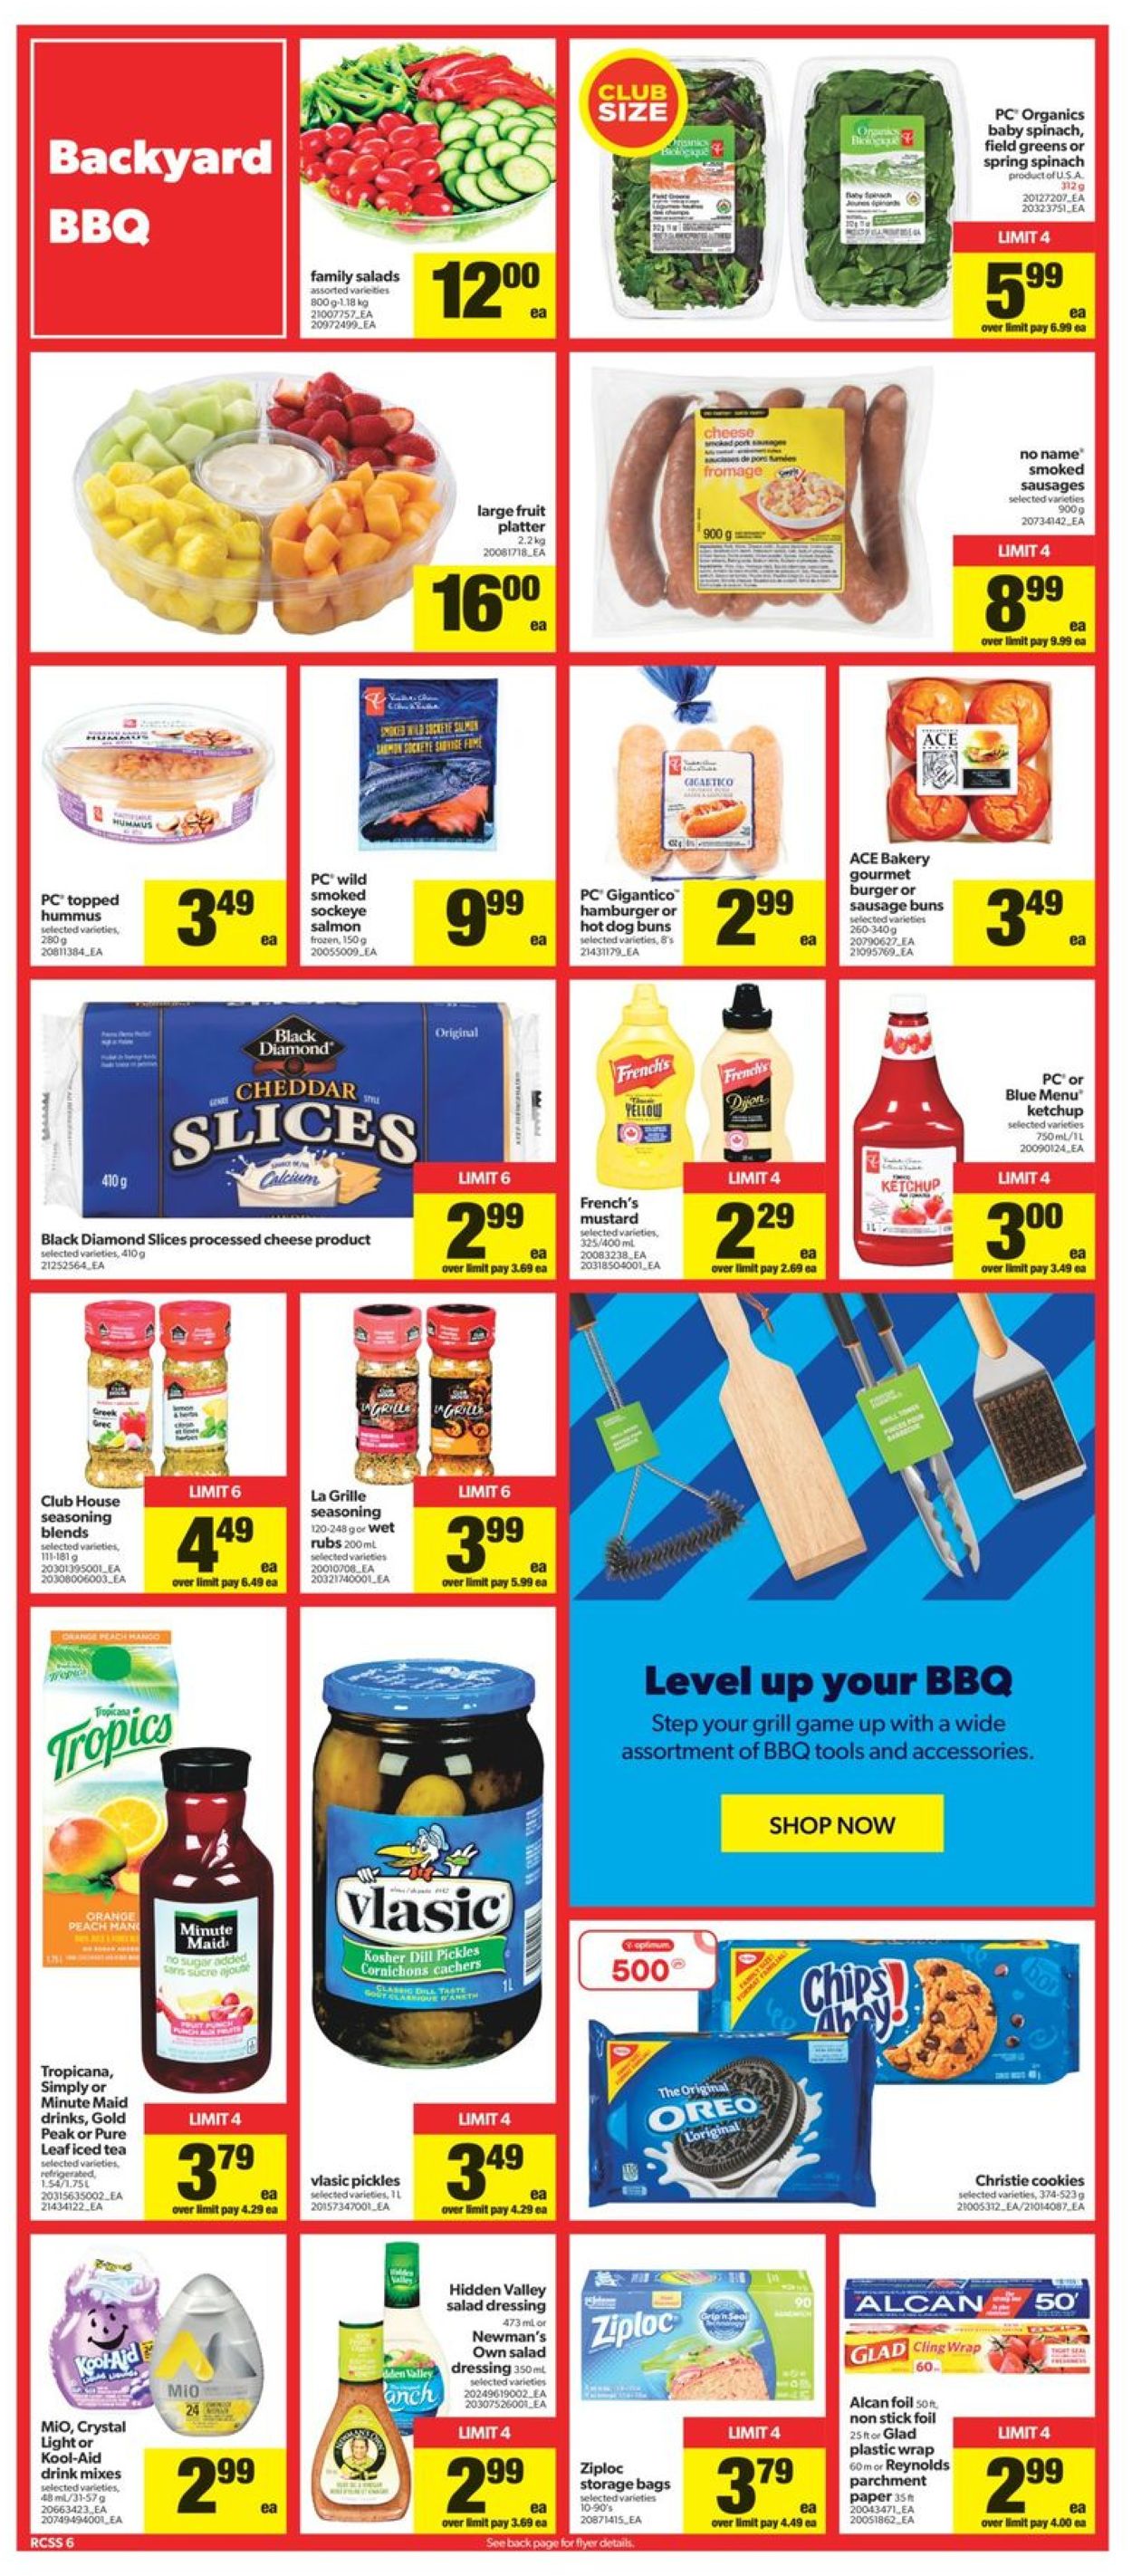 Real Canadian Superstore Flyer from 05/05/2022